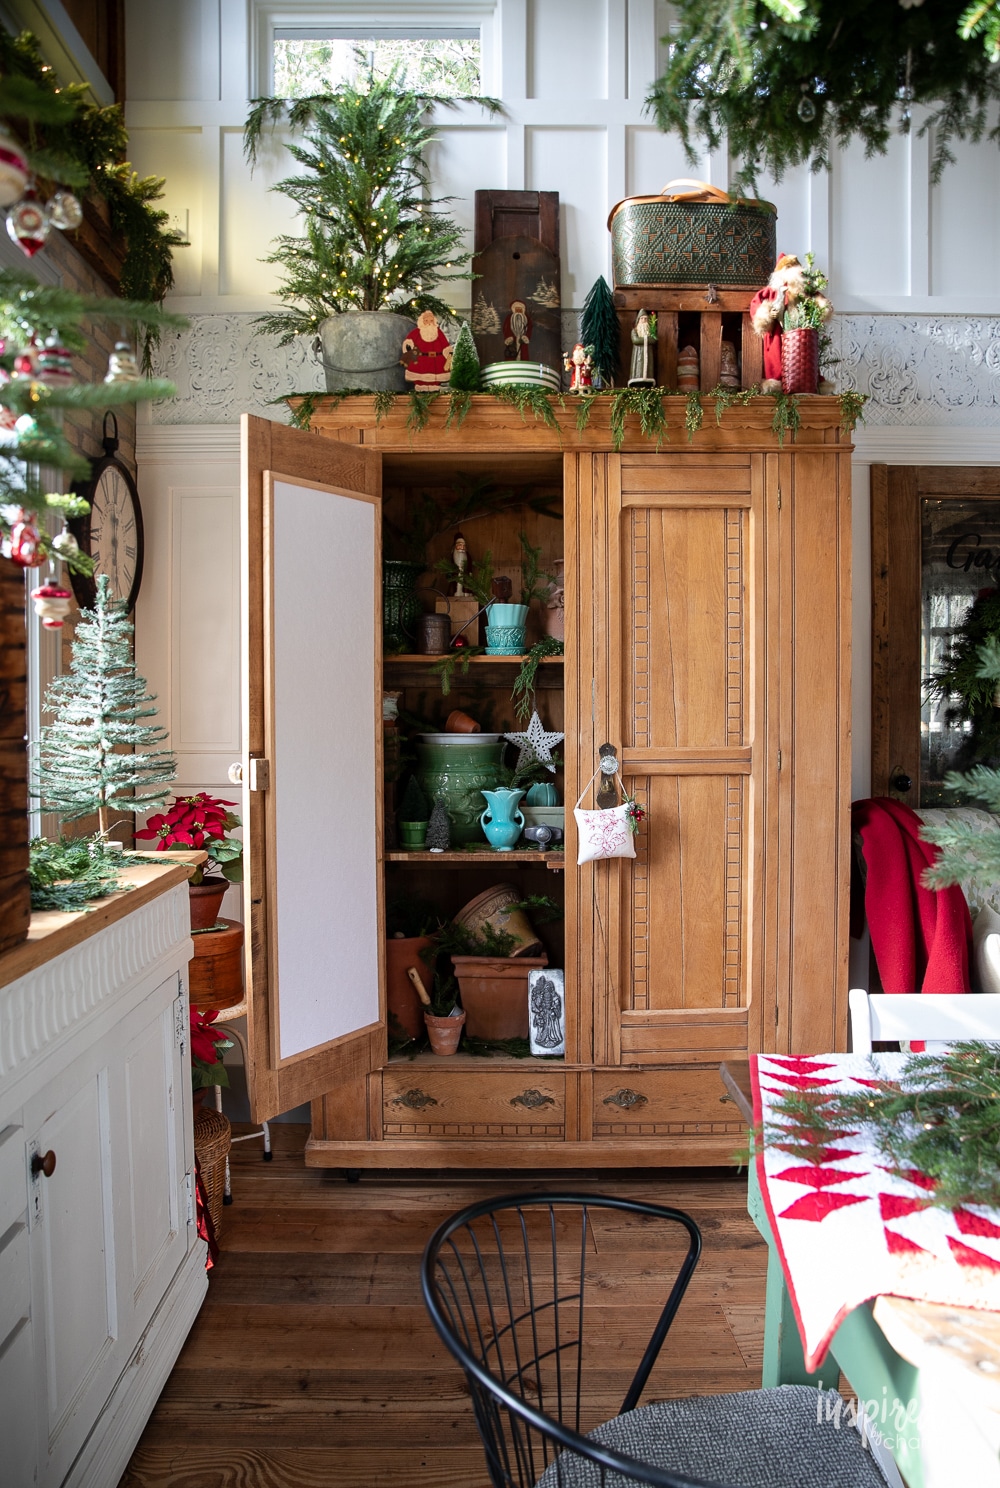 beautiful large pine cabinet filled with potting shed treasures.